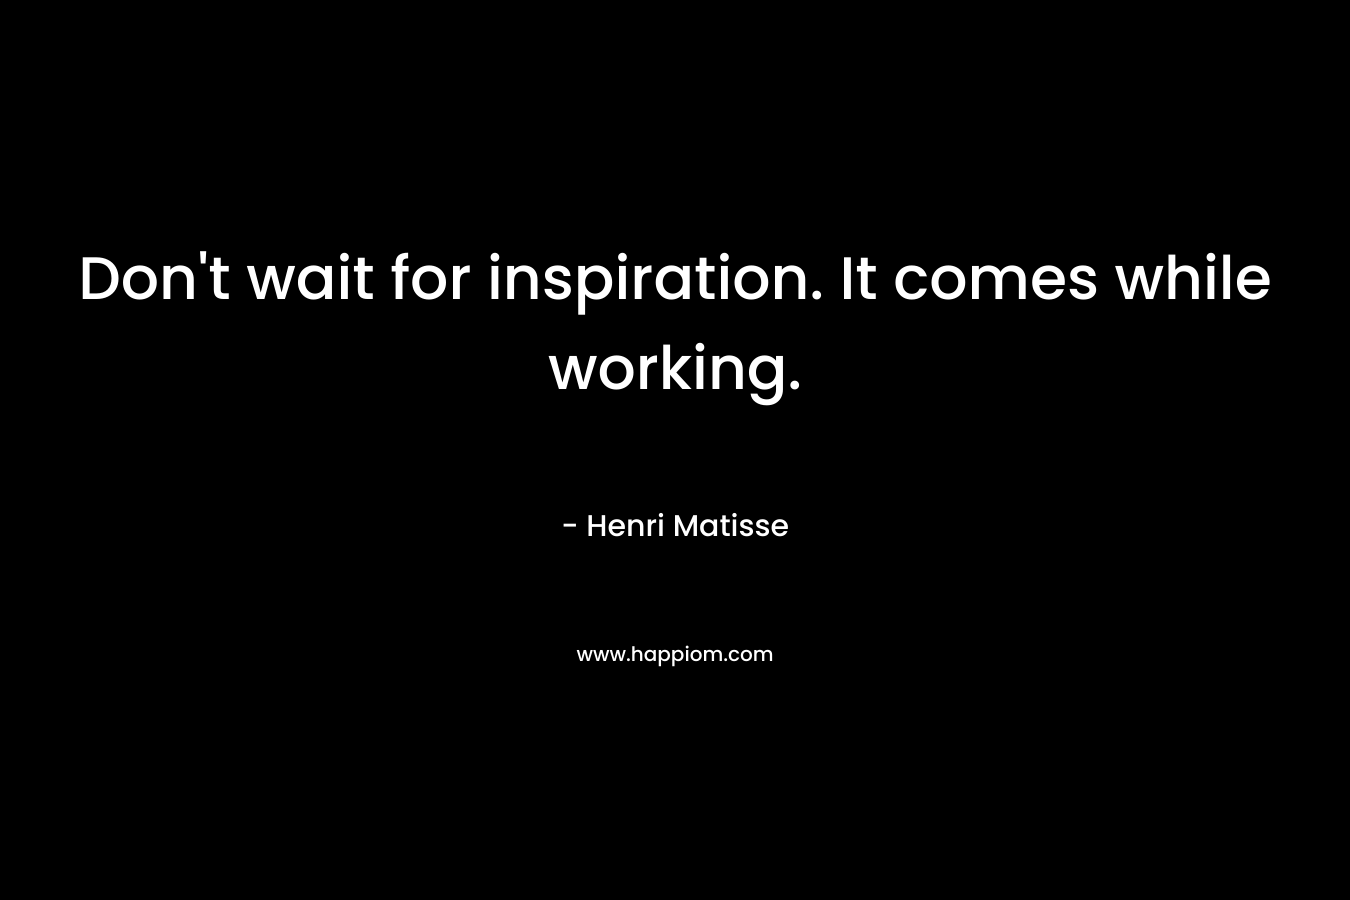 Don't wait for inspiration. It comes while working.